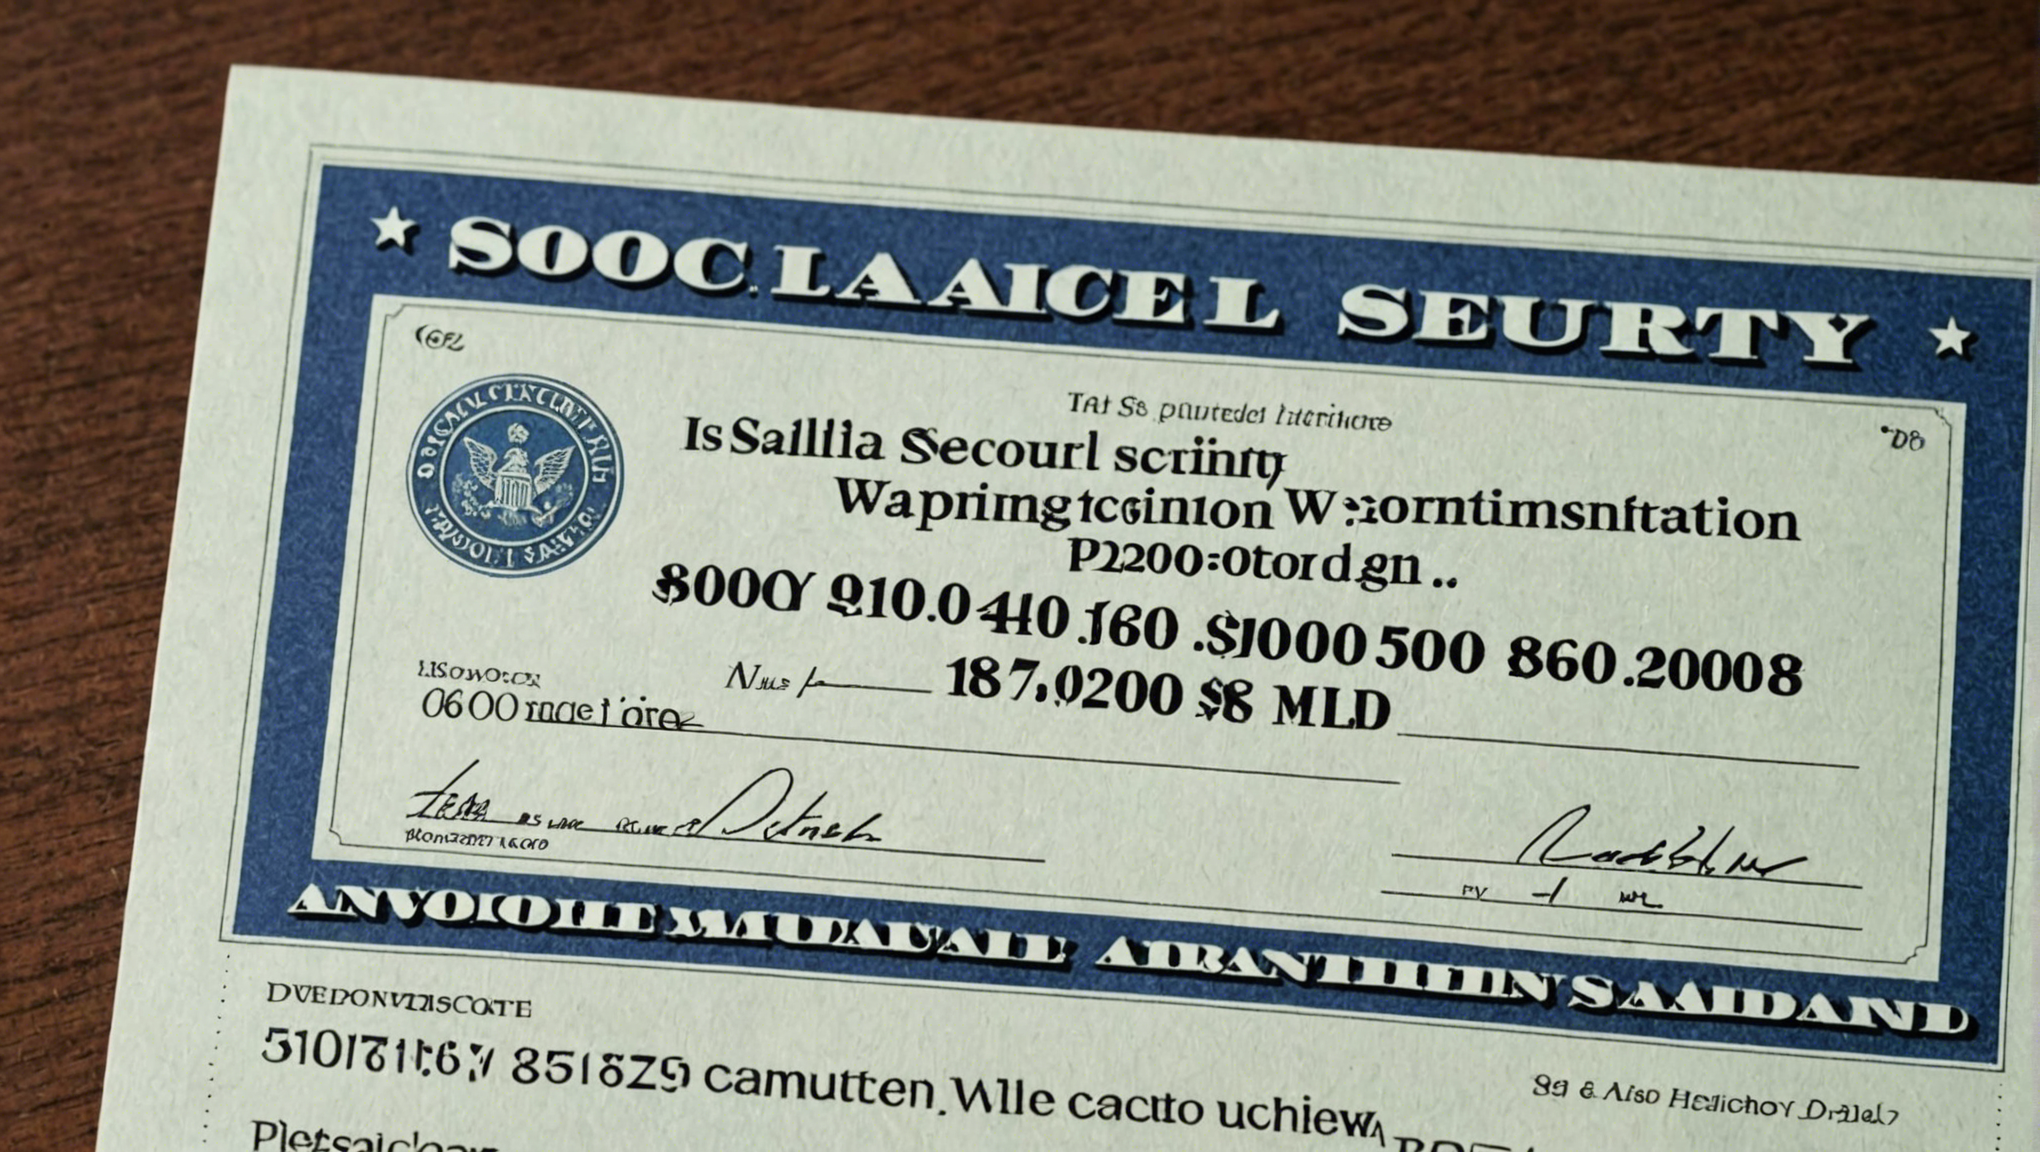 stay informed about the potential scam involving a $600 payment, as reported by the social security administration. uncover the startling details now!